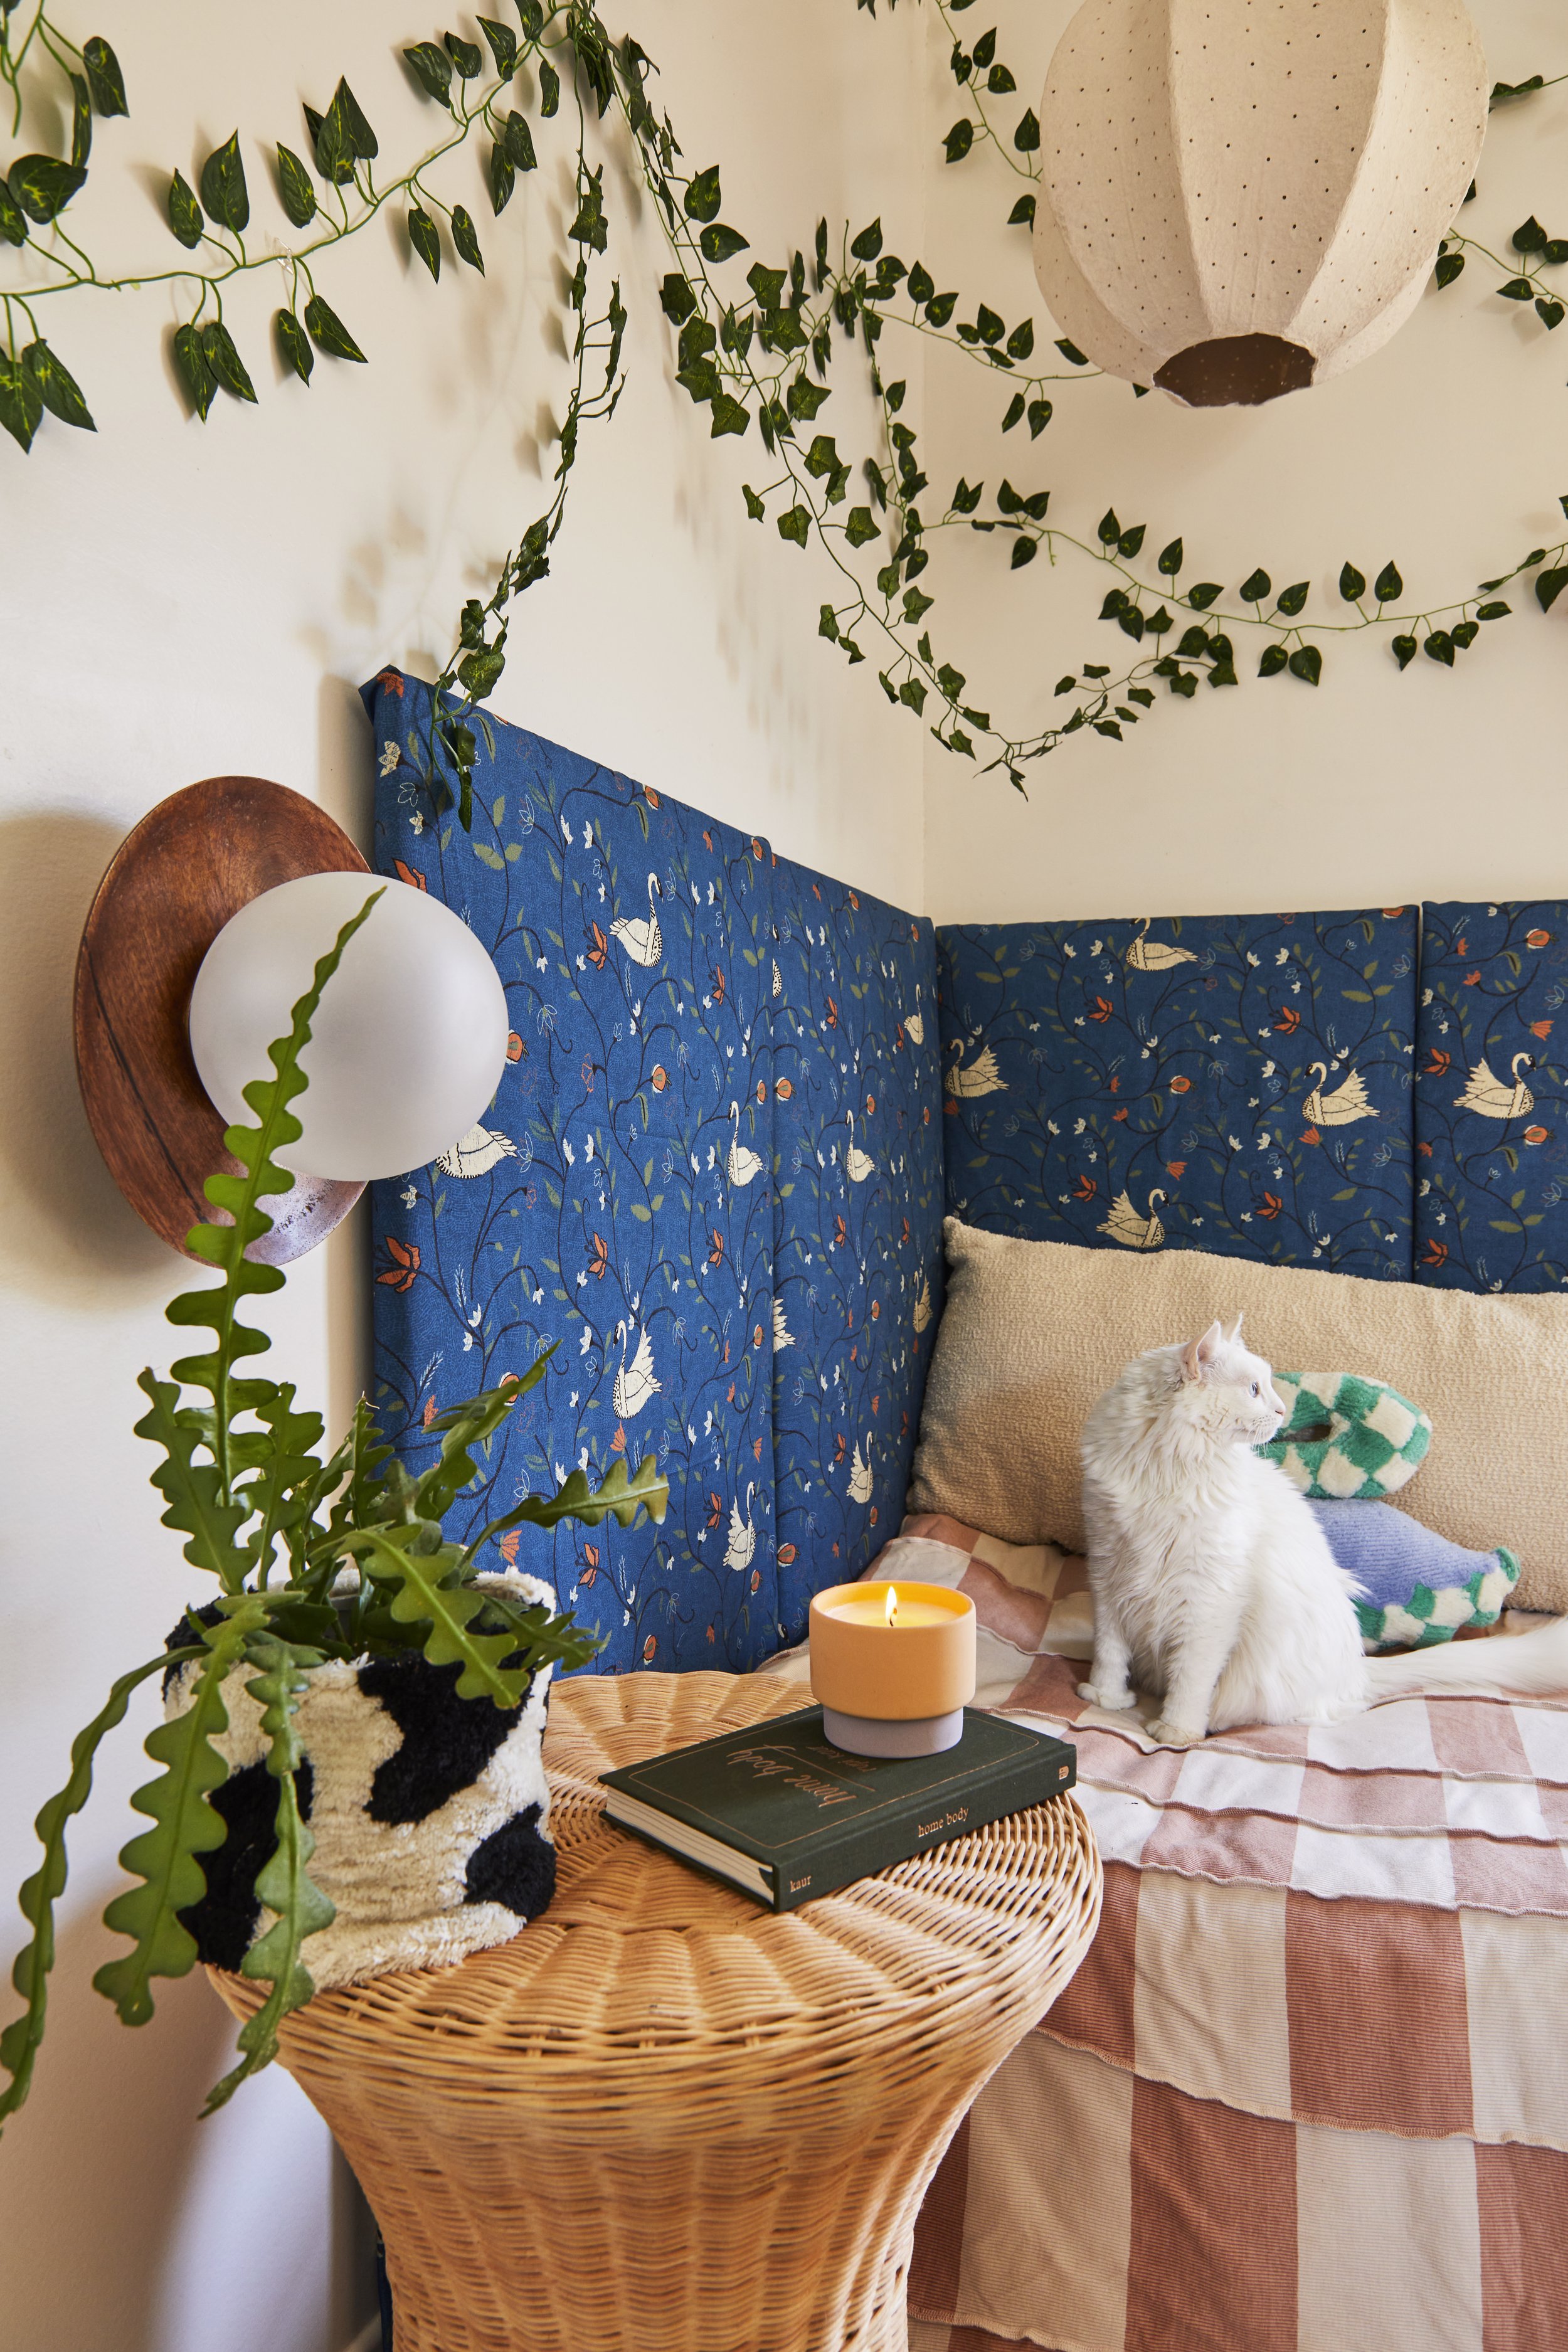  photographed for  emily henderson design  in partnership with  urban outfitters home  